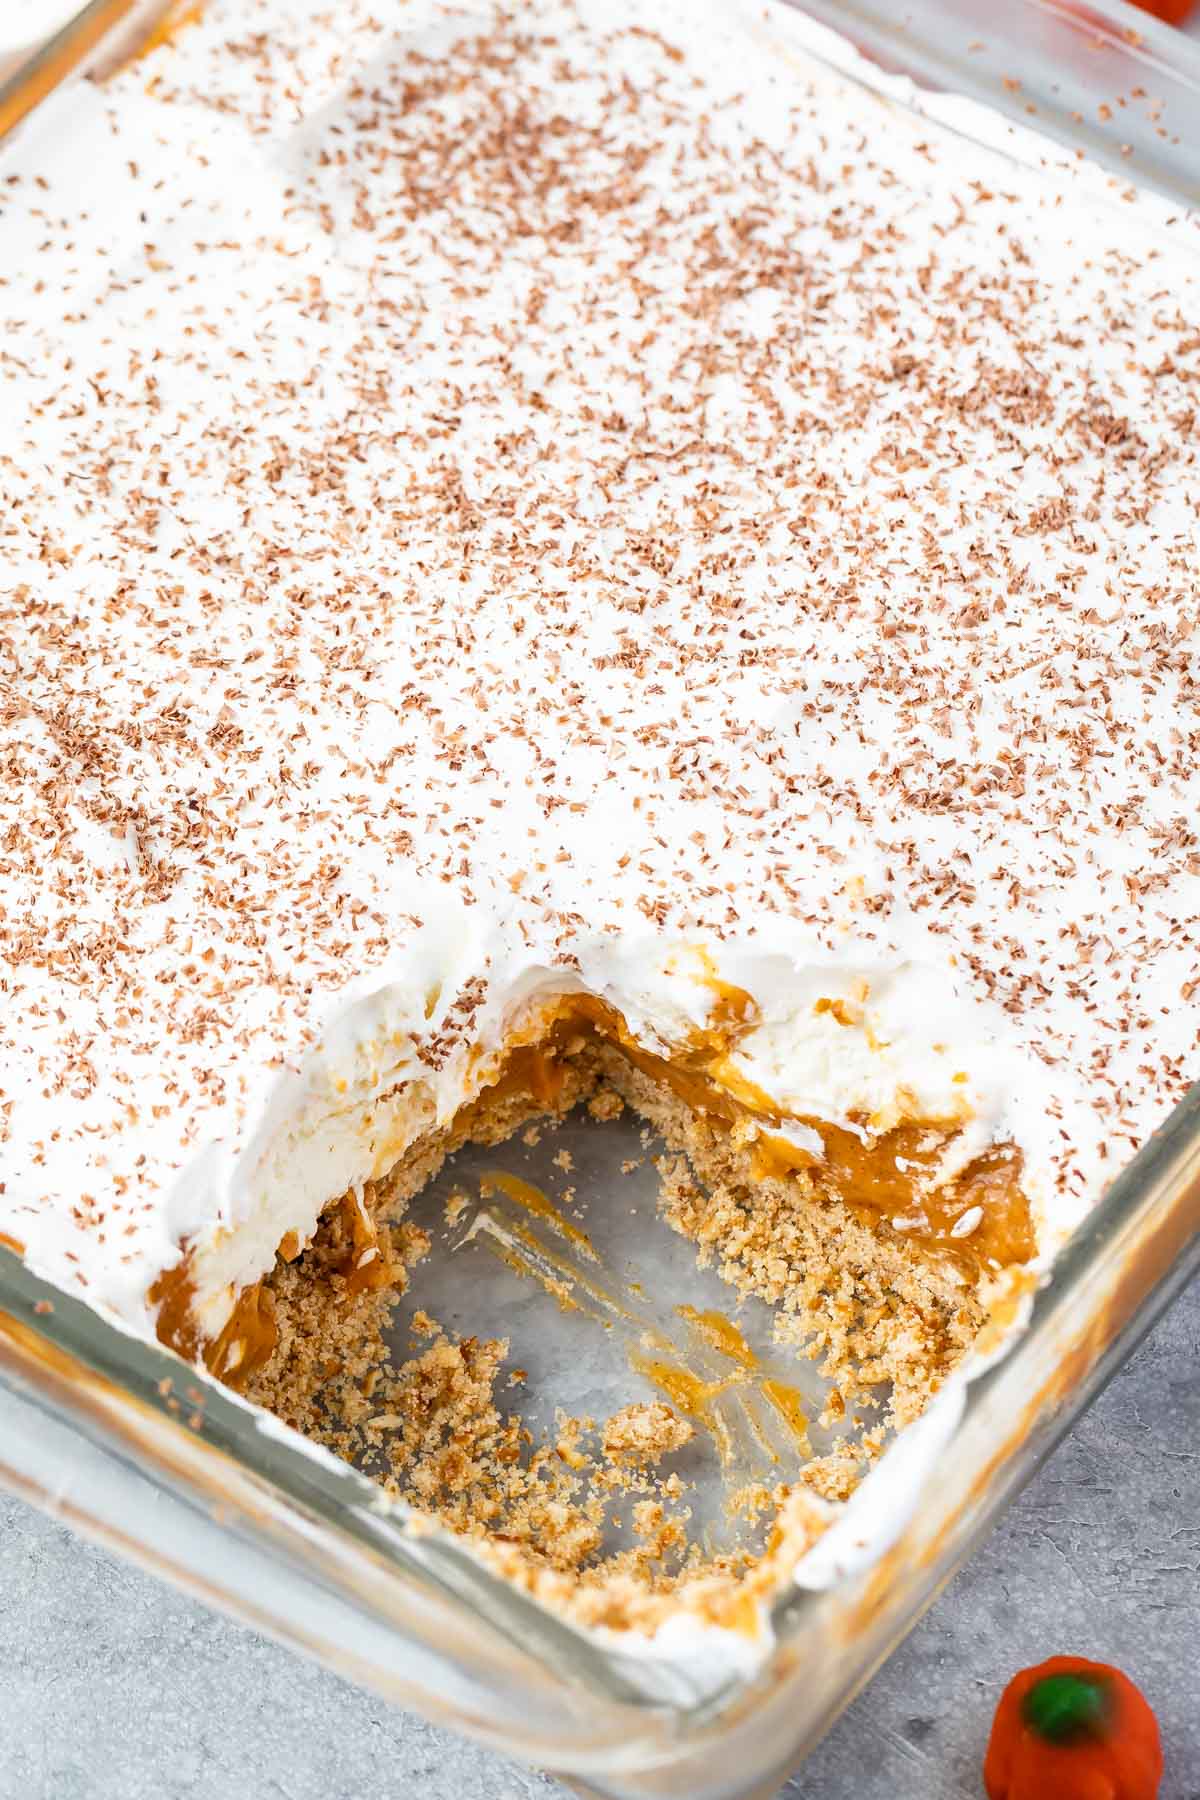 full clear pan of pumpkin dessert with white frosting and a slice taken out of the pan